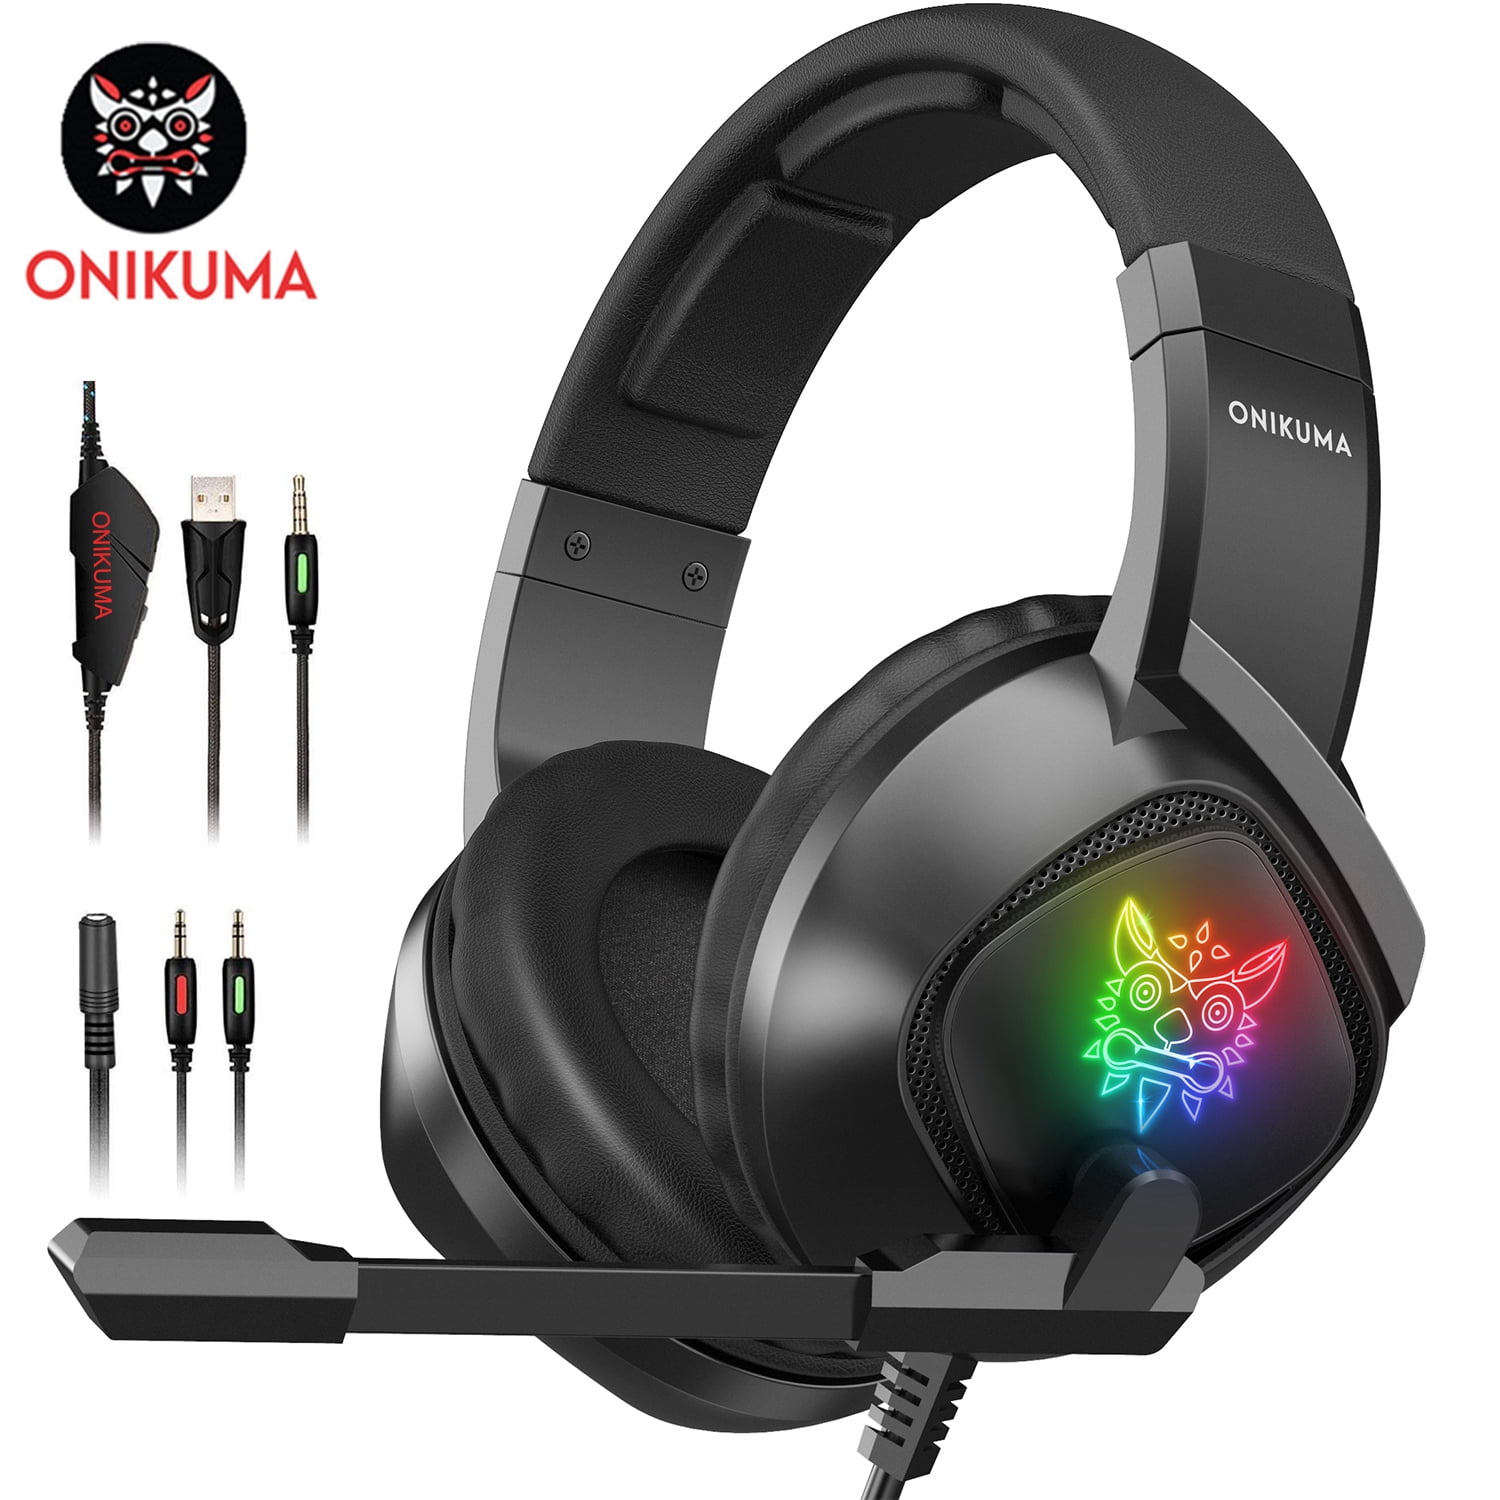 ONIKUMA Gaming Headset, 7.1 Surround Sound Stereo Pc Gaming Headphones, Gaming Headsets with Noise Canceling Mic & Light Headsets Compatible with PC, PS4,PS5, Xbox One Controller, Nintendo Switch - Walmart.com